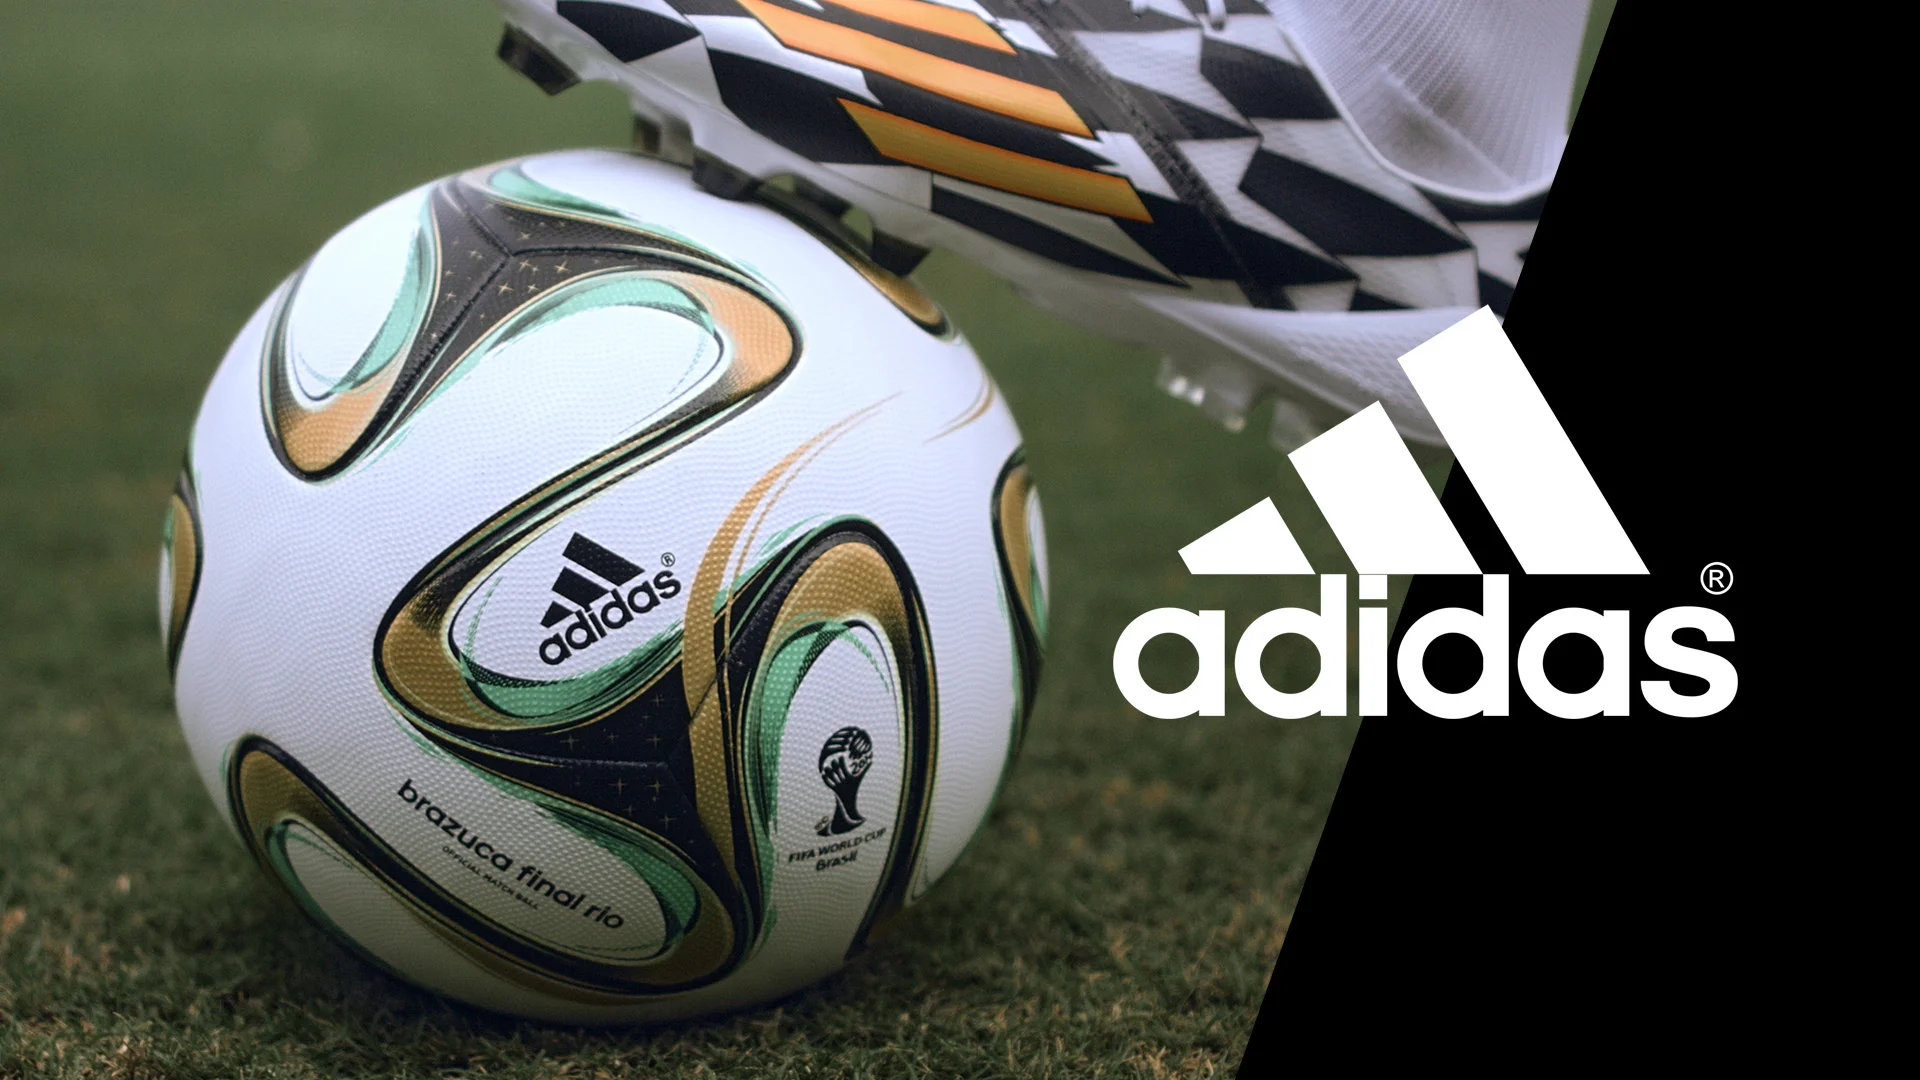 Brazuca. Match ball of 2014 FIFA world cup official ball - commercial ad 